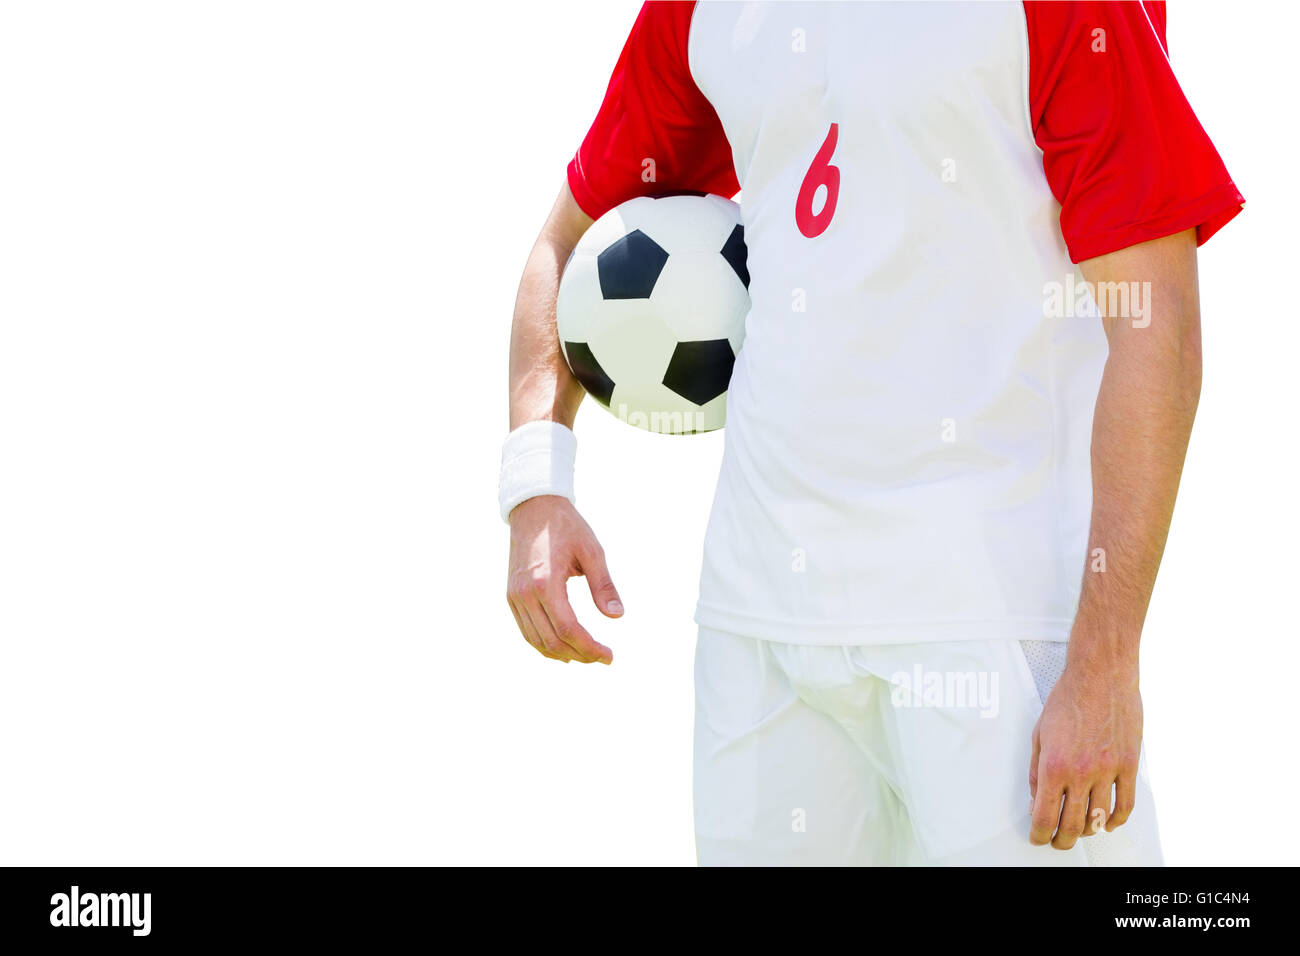 Man soccer player holding a ball Stock Photo